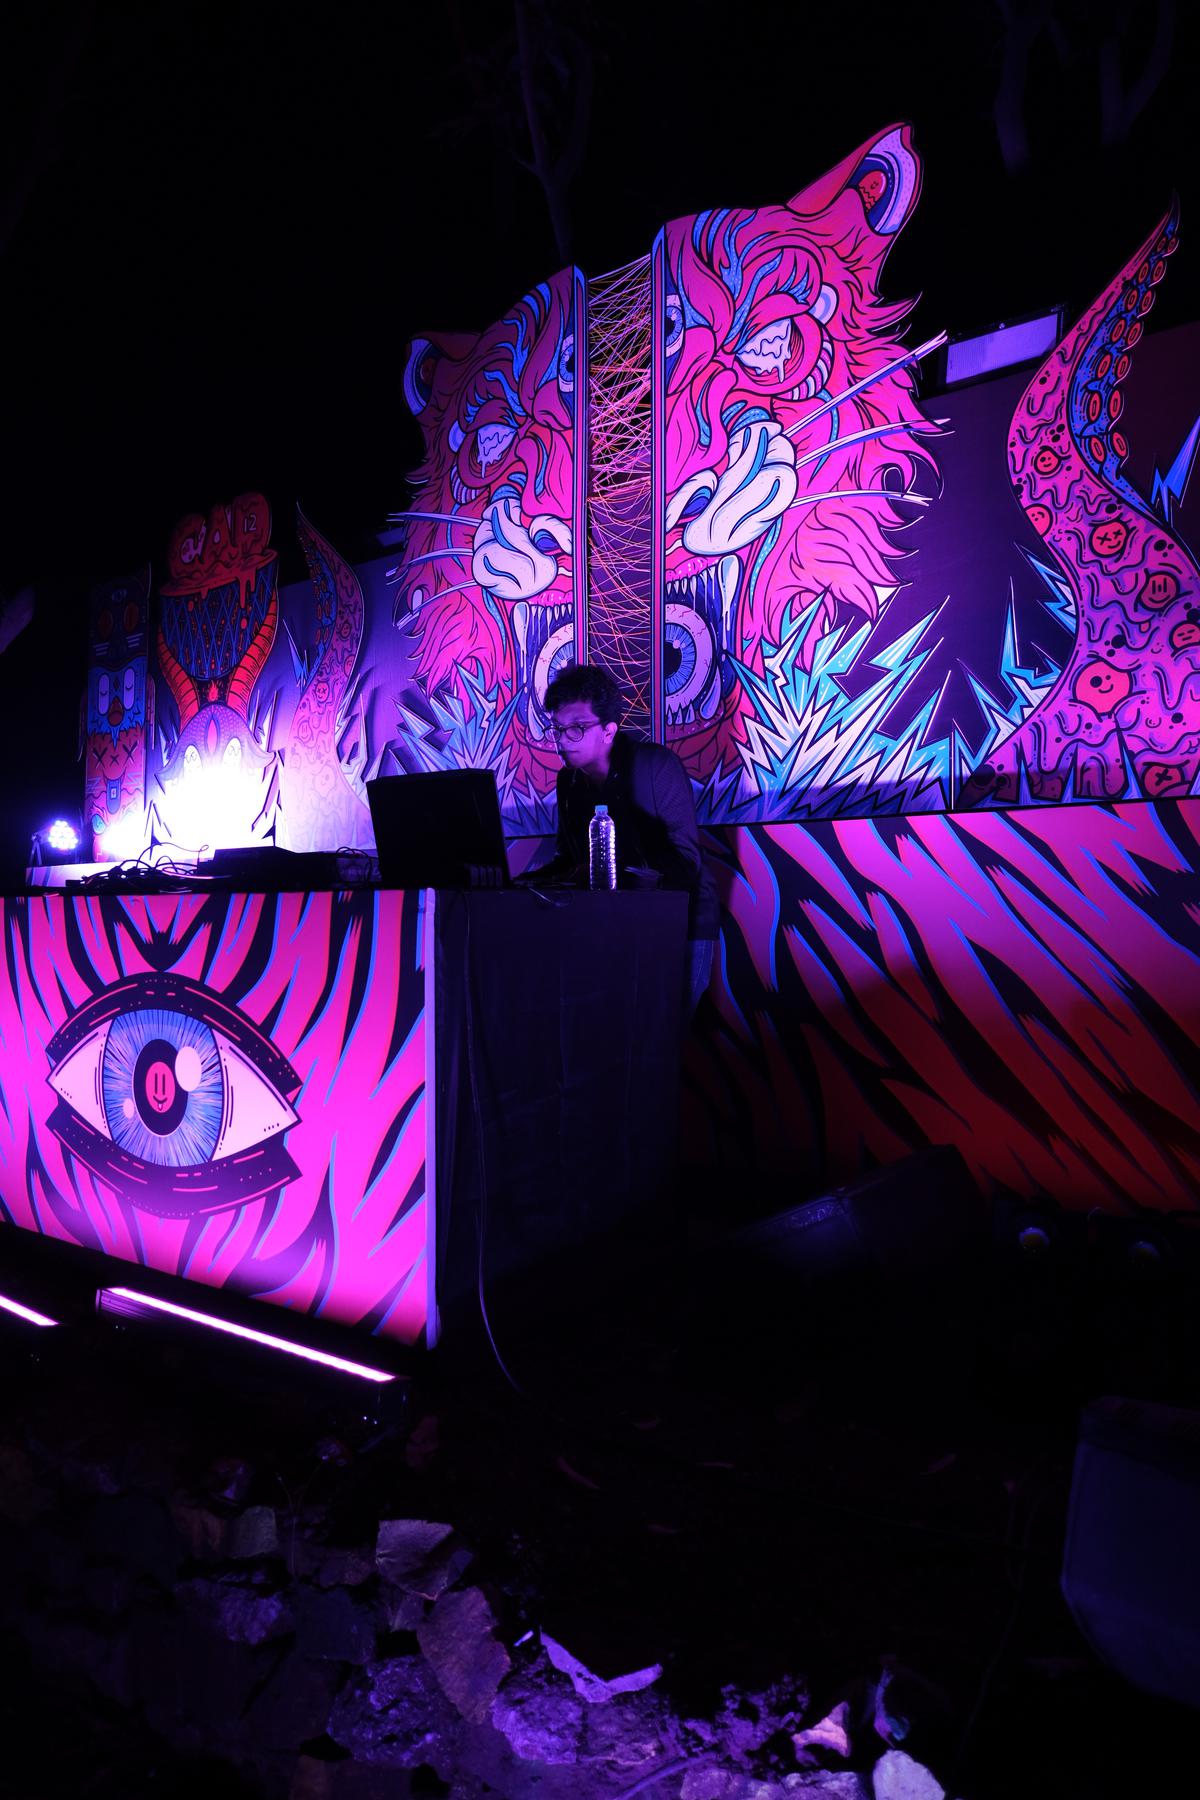 The Three Oscillators at the Electric Jungle stage